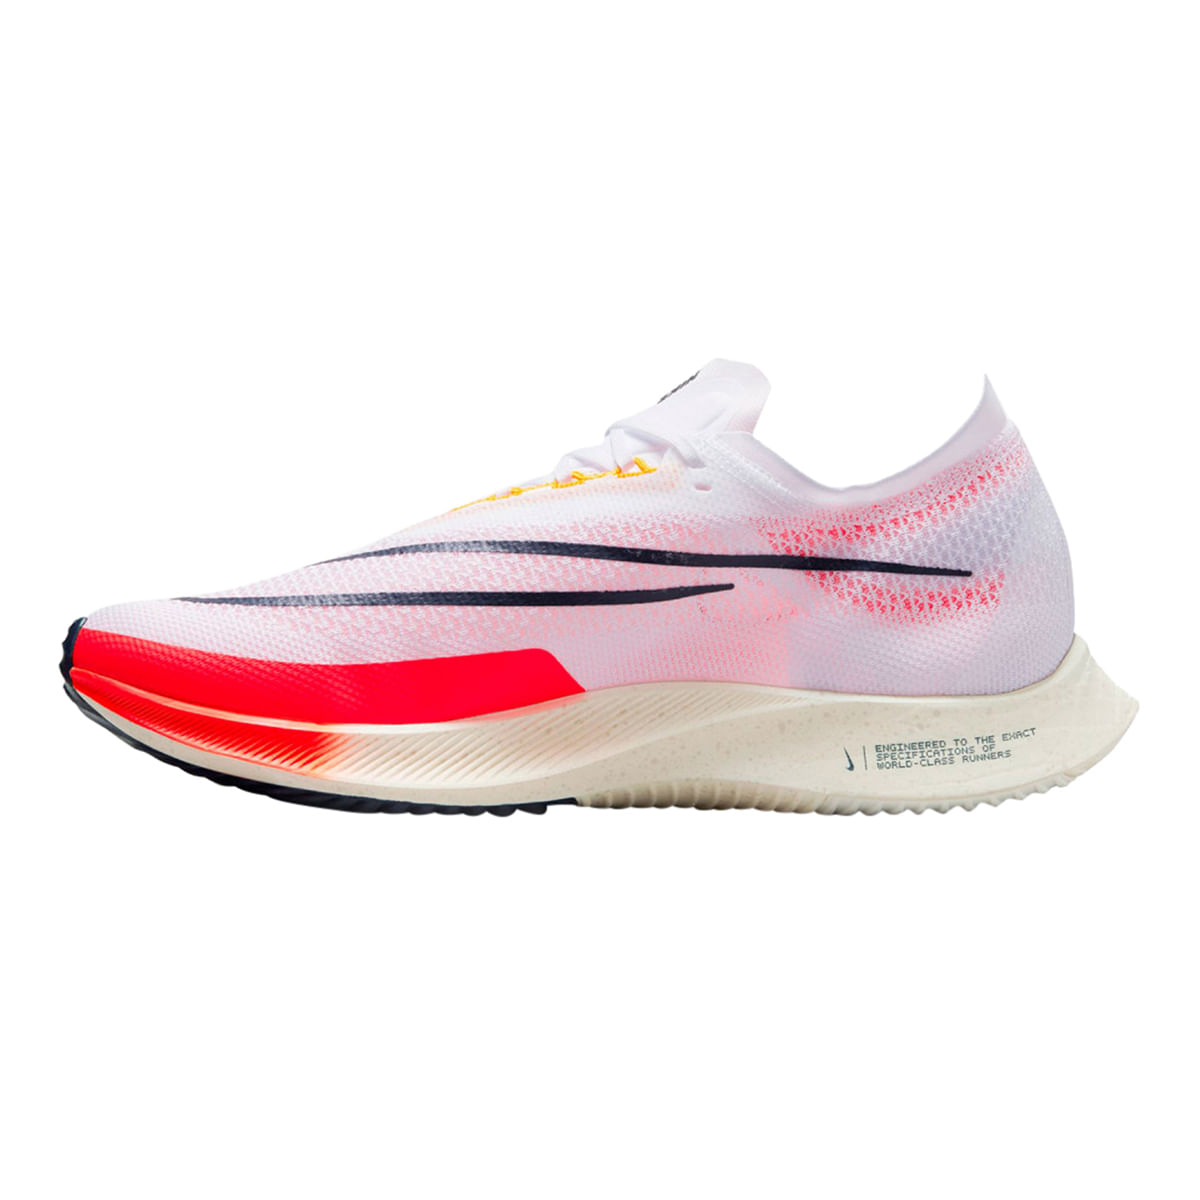 Nike Mens ZOOMX STREAKFLY WHITE-OBSIDIAN - Paragon Sports: NYC's Best  Specialty Sports Store